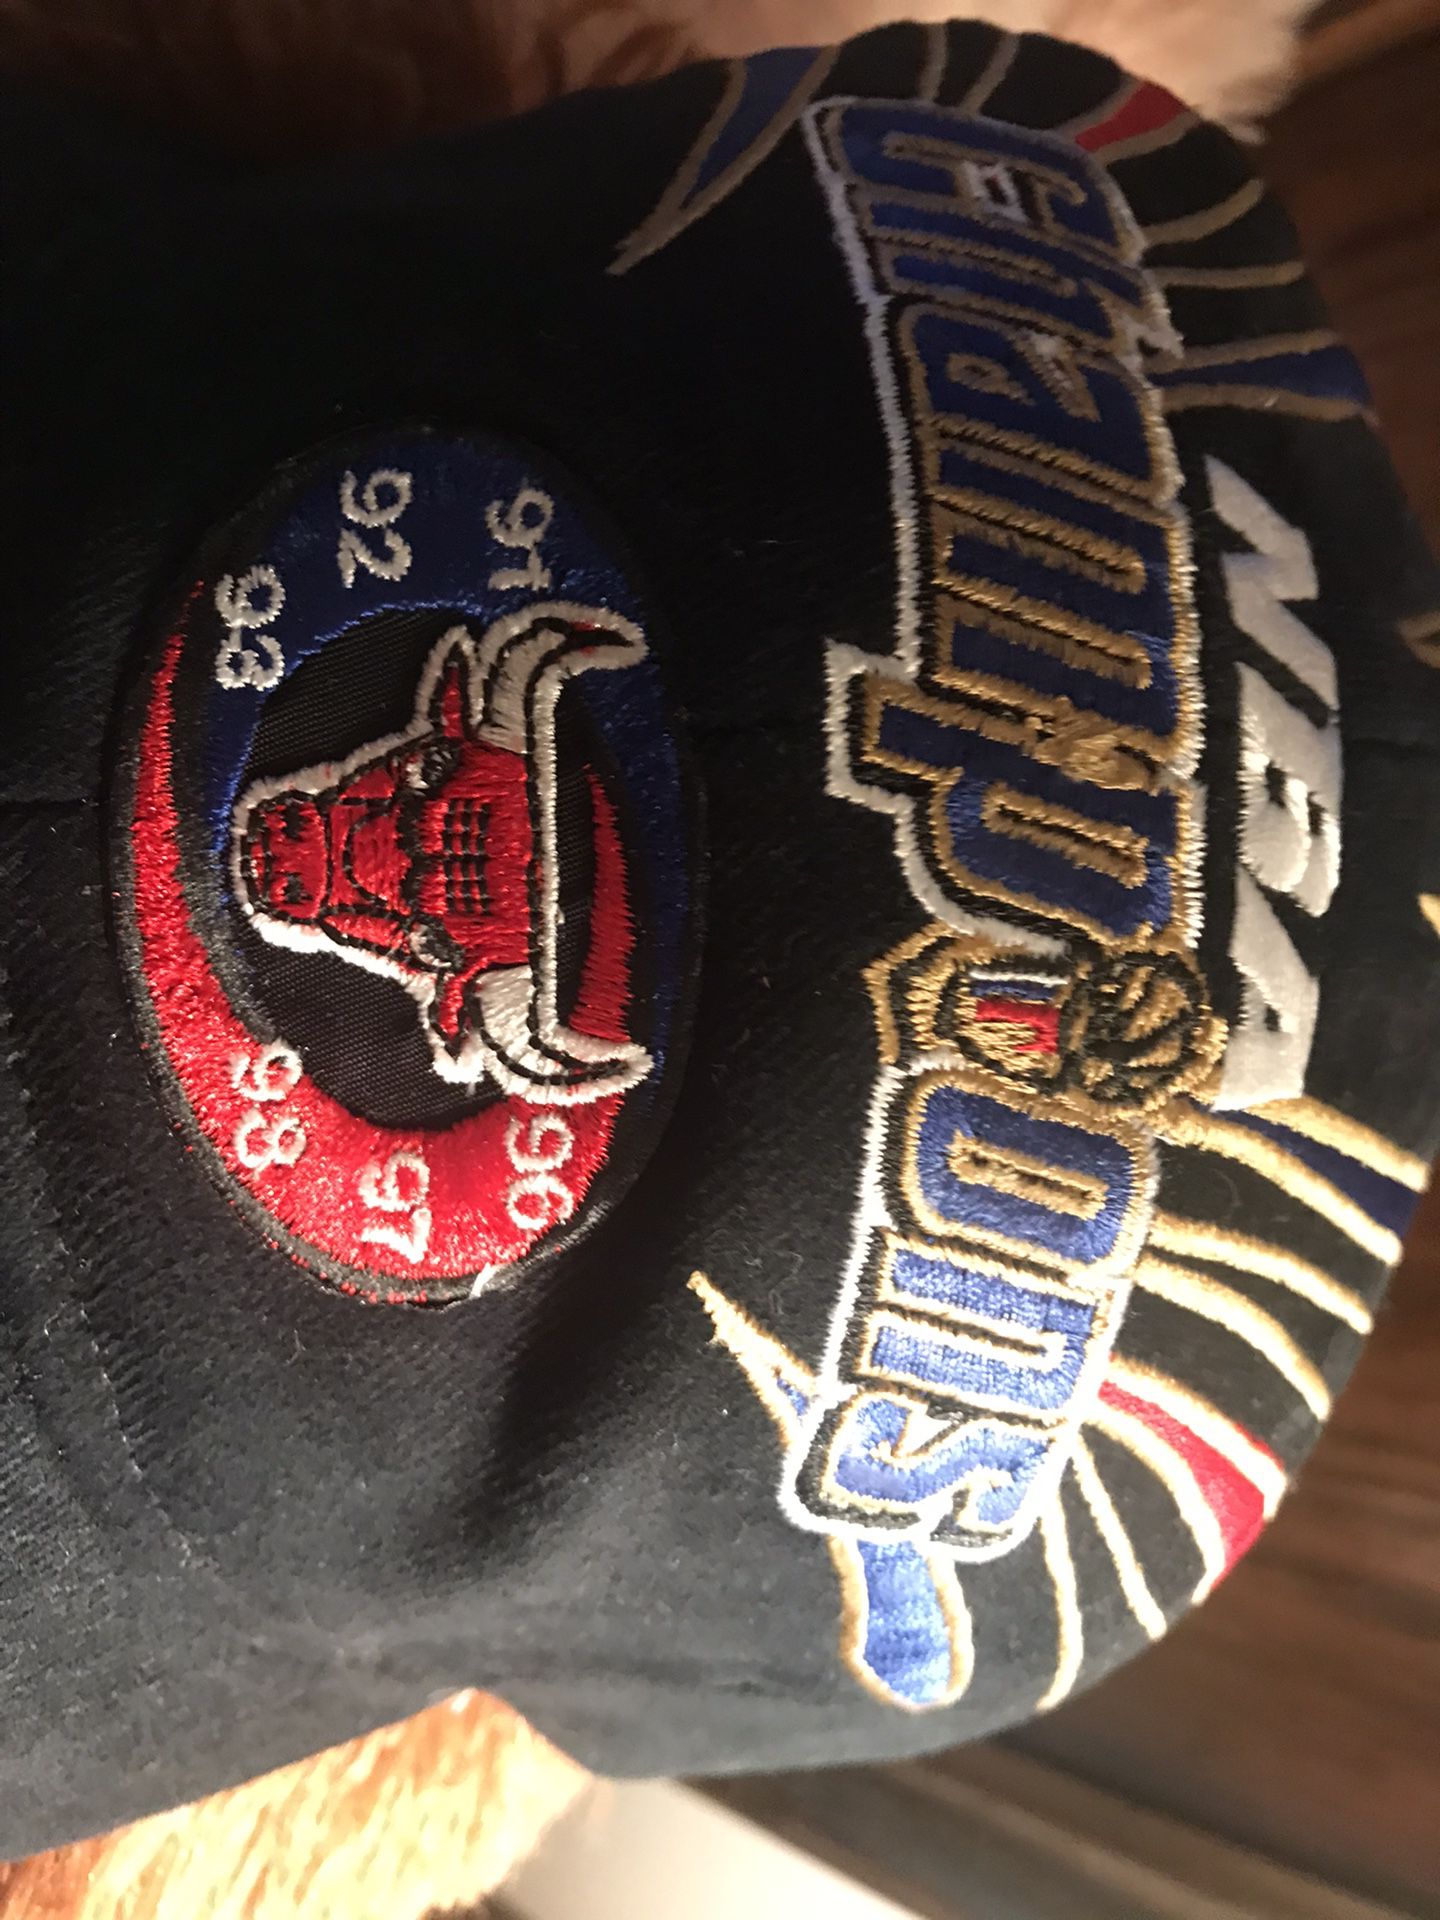 Chicago Bulls Vintage 1997 NBA Champions Logo Athletic Locker Room Snapback  for Sale in Chicago, IL - OfferUp